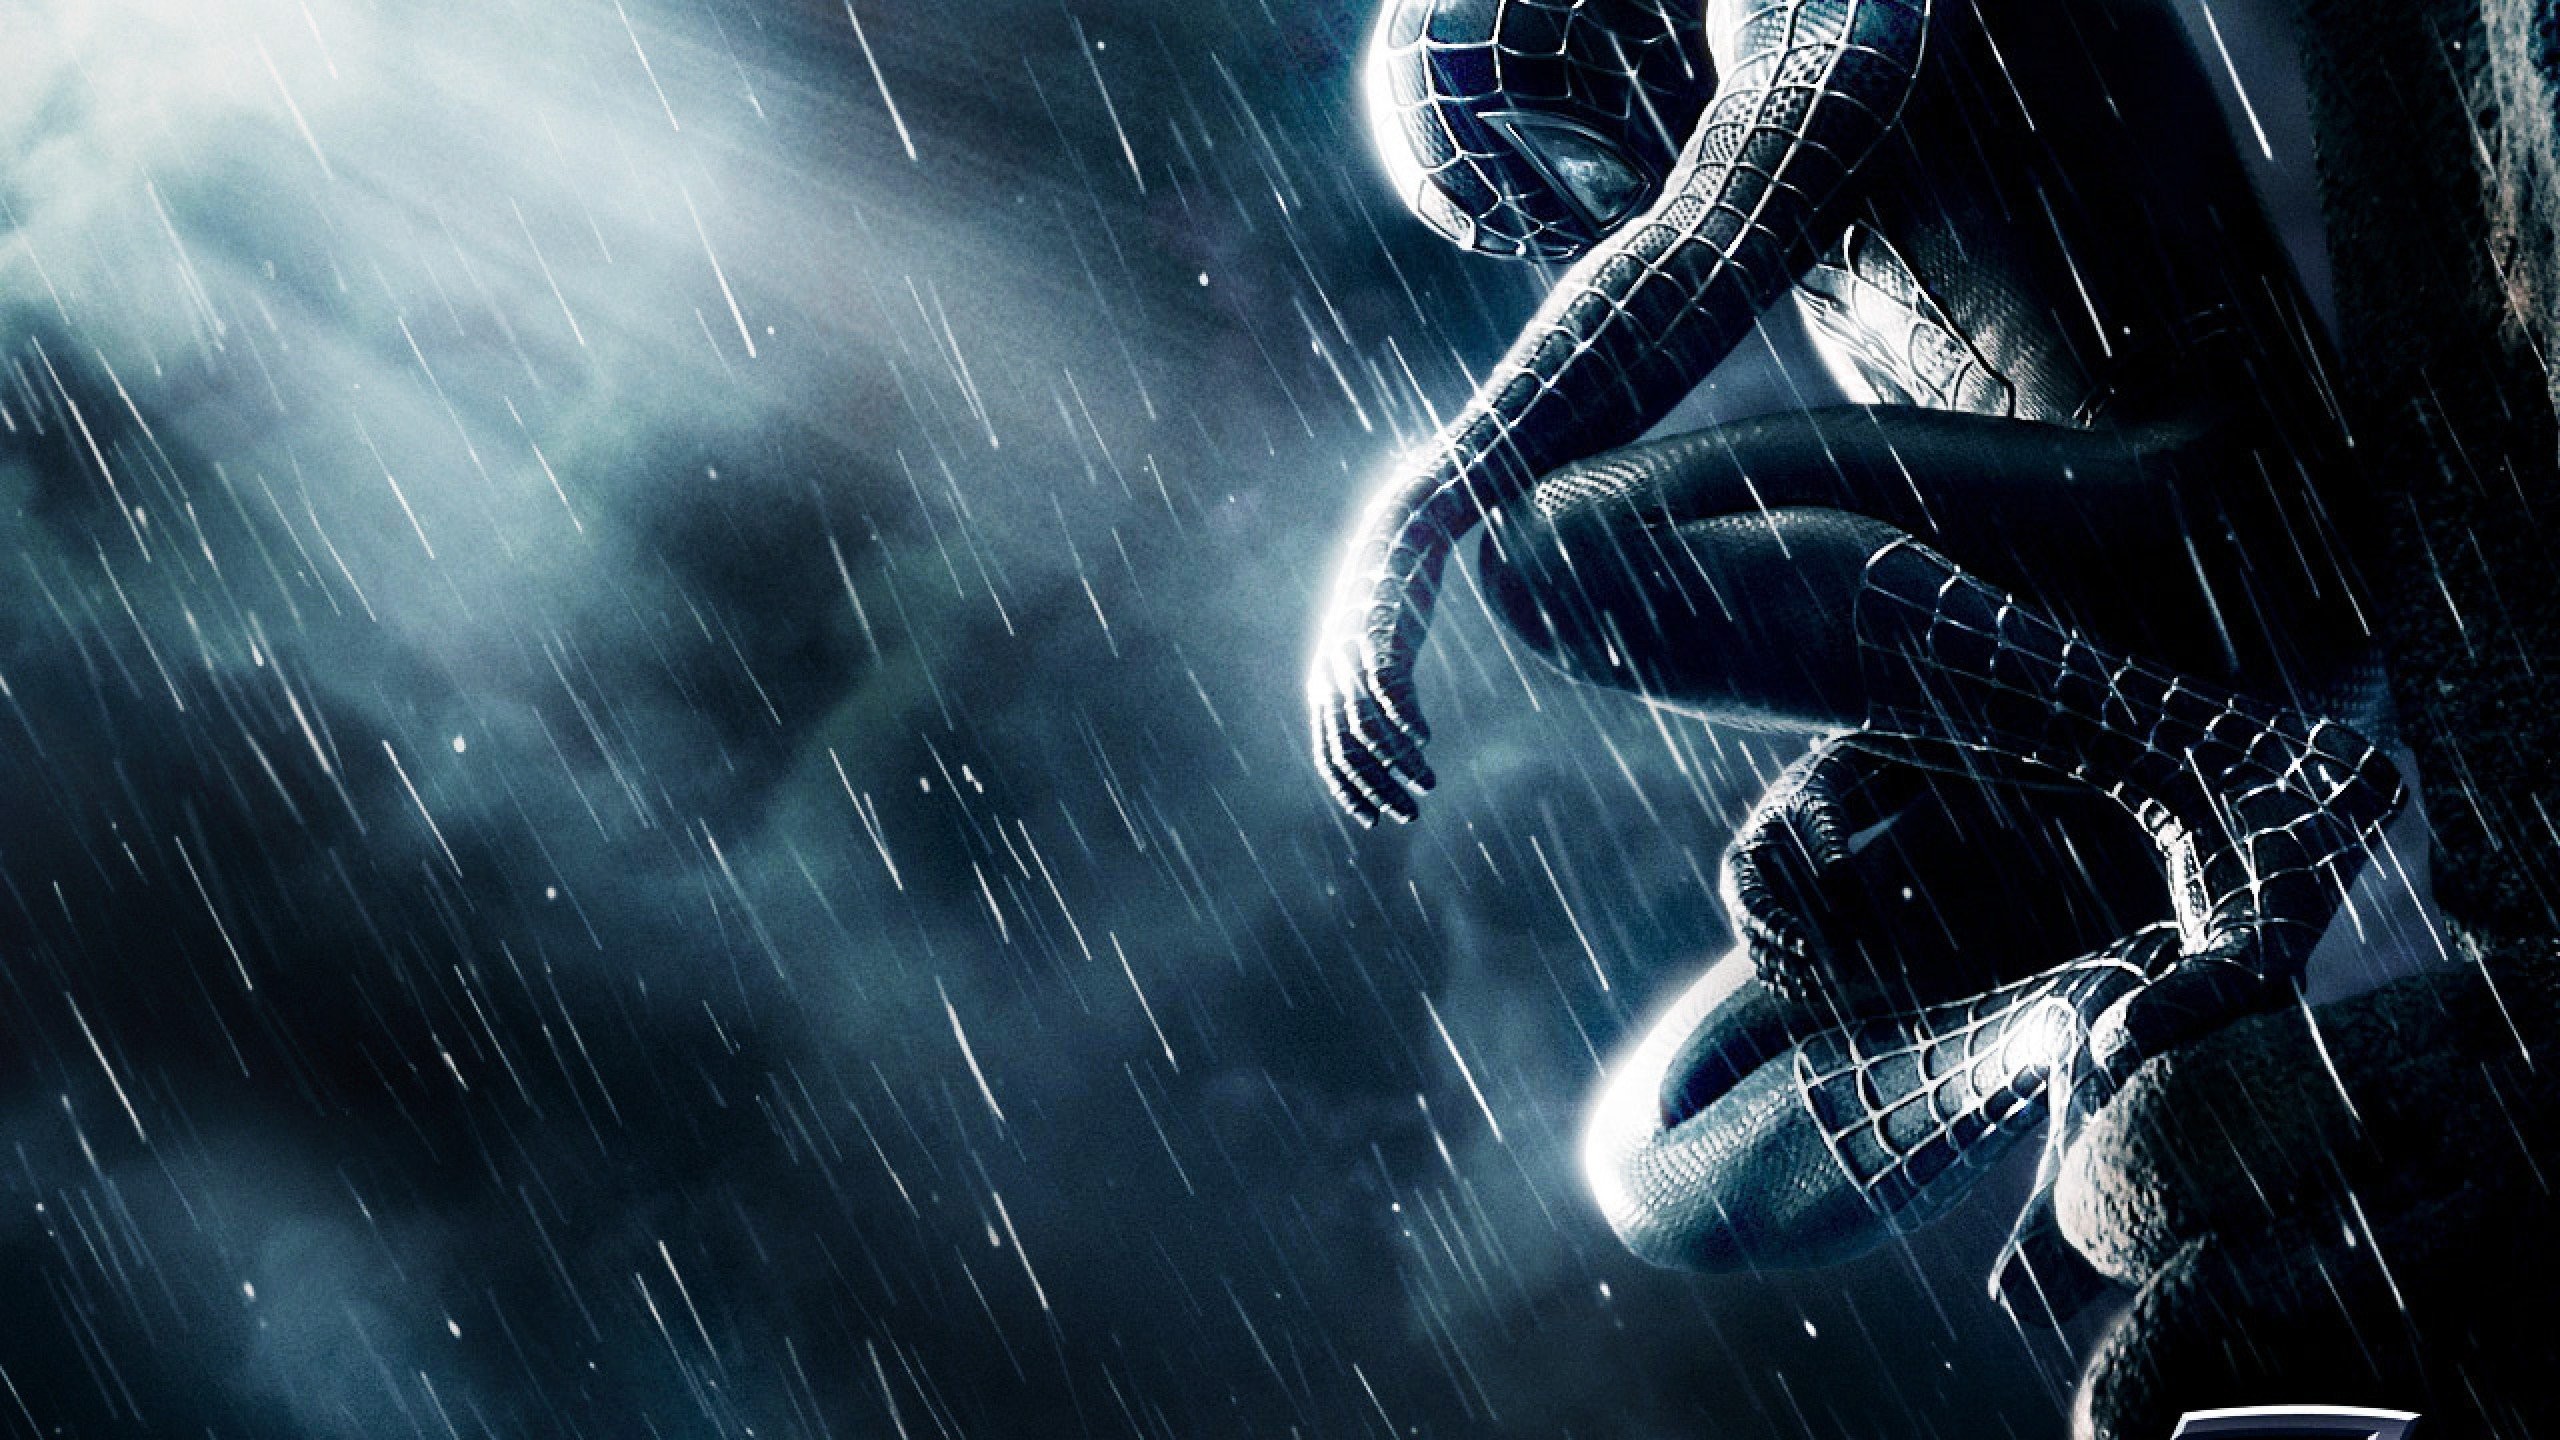 spiderman hd wallpaper 1920x1080,sky,water,space,cg artwork,outer space